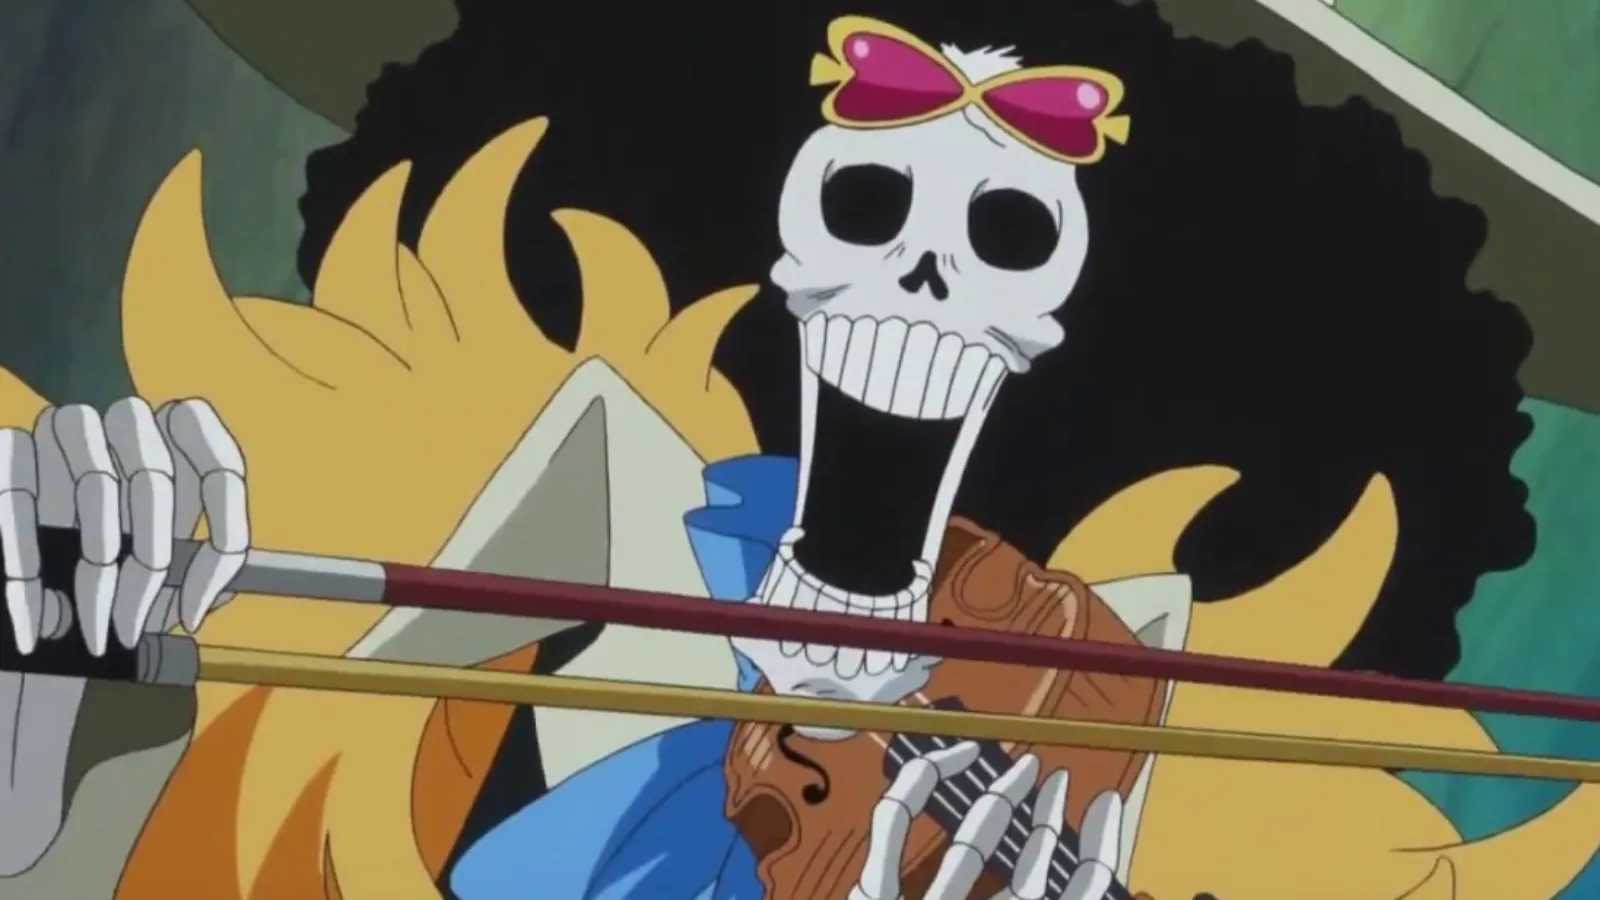 Brook from One Piece playing the violin